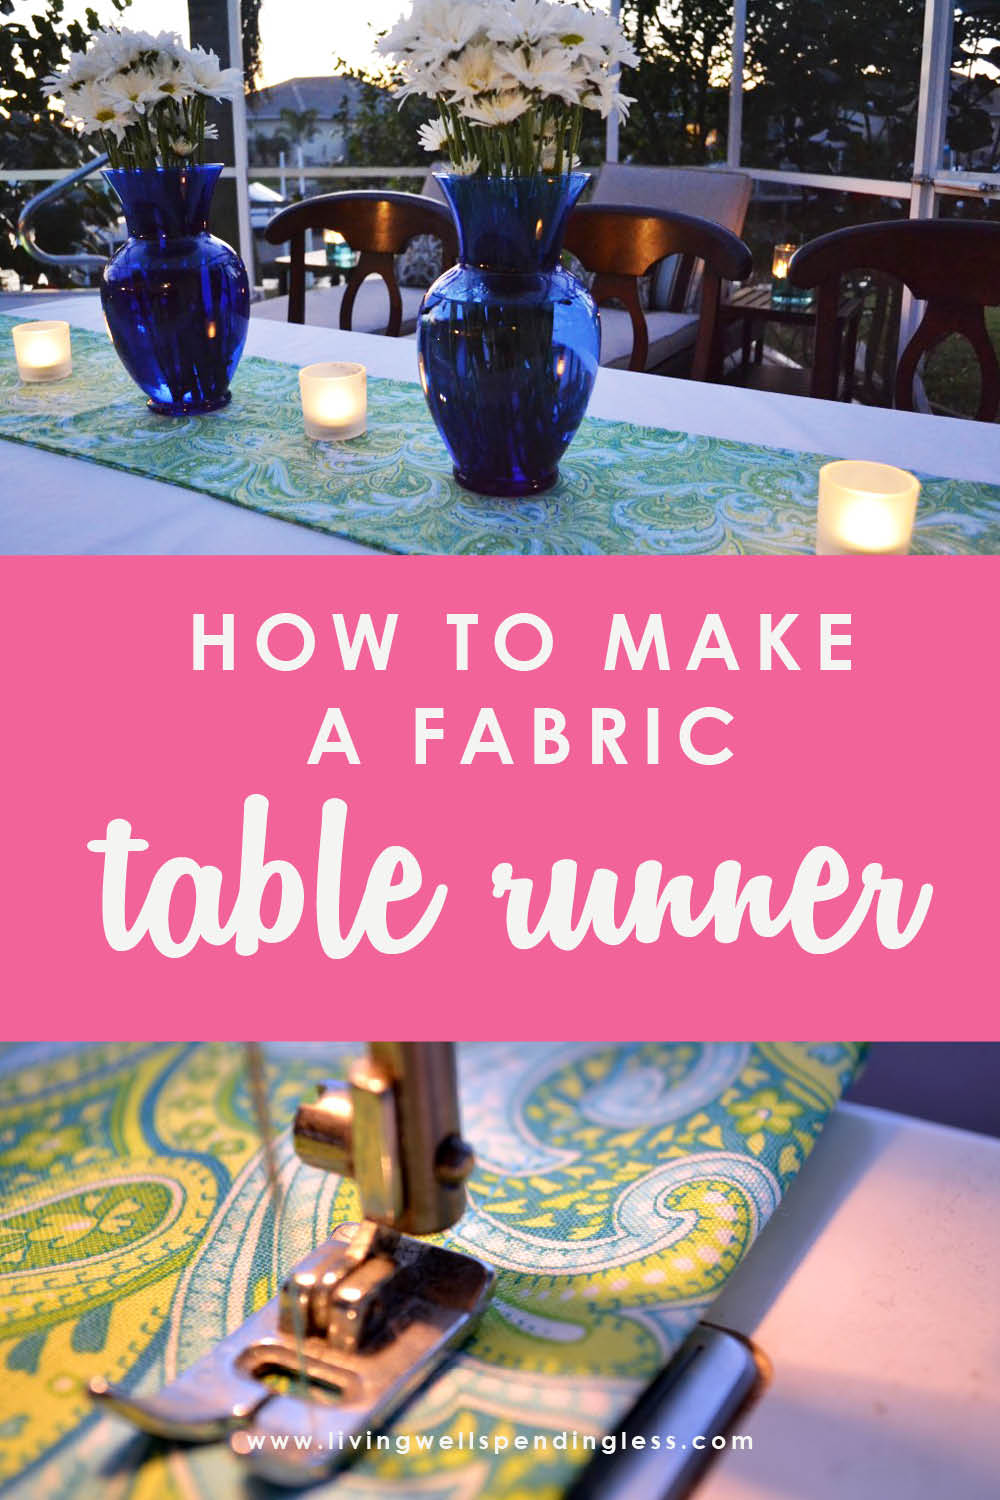 Want to create the perfect party table without spending a ton of money? This easy DIY tutorial will show you how to make a fabric table runner for less!